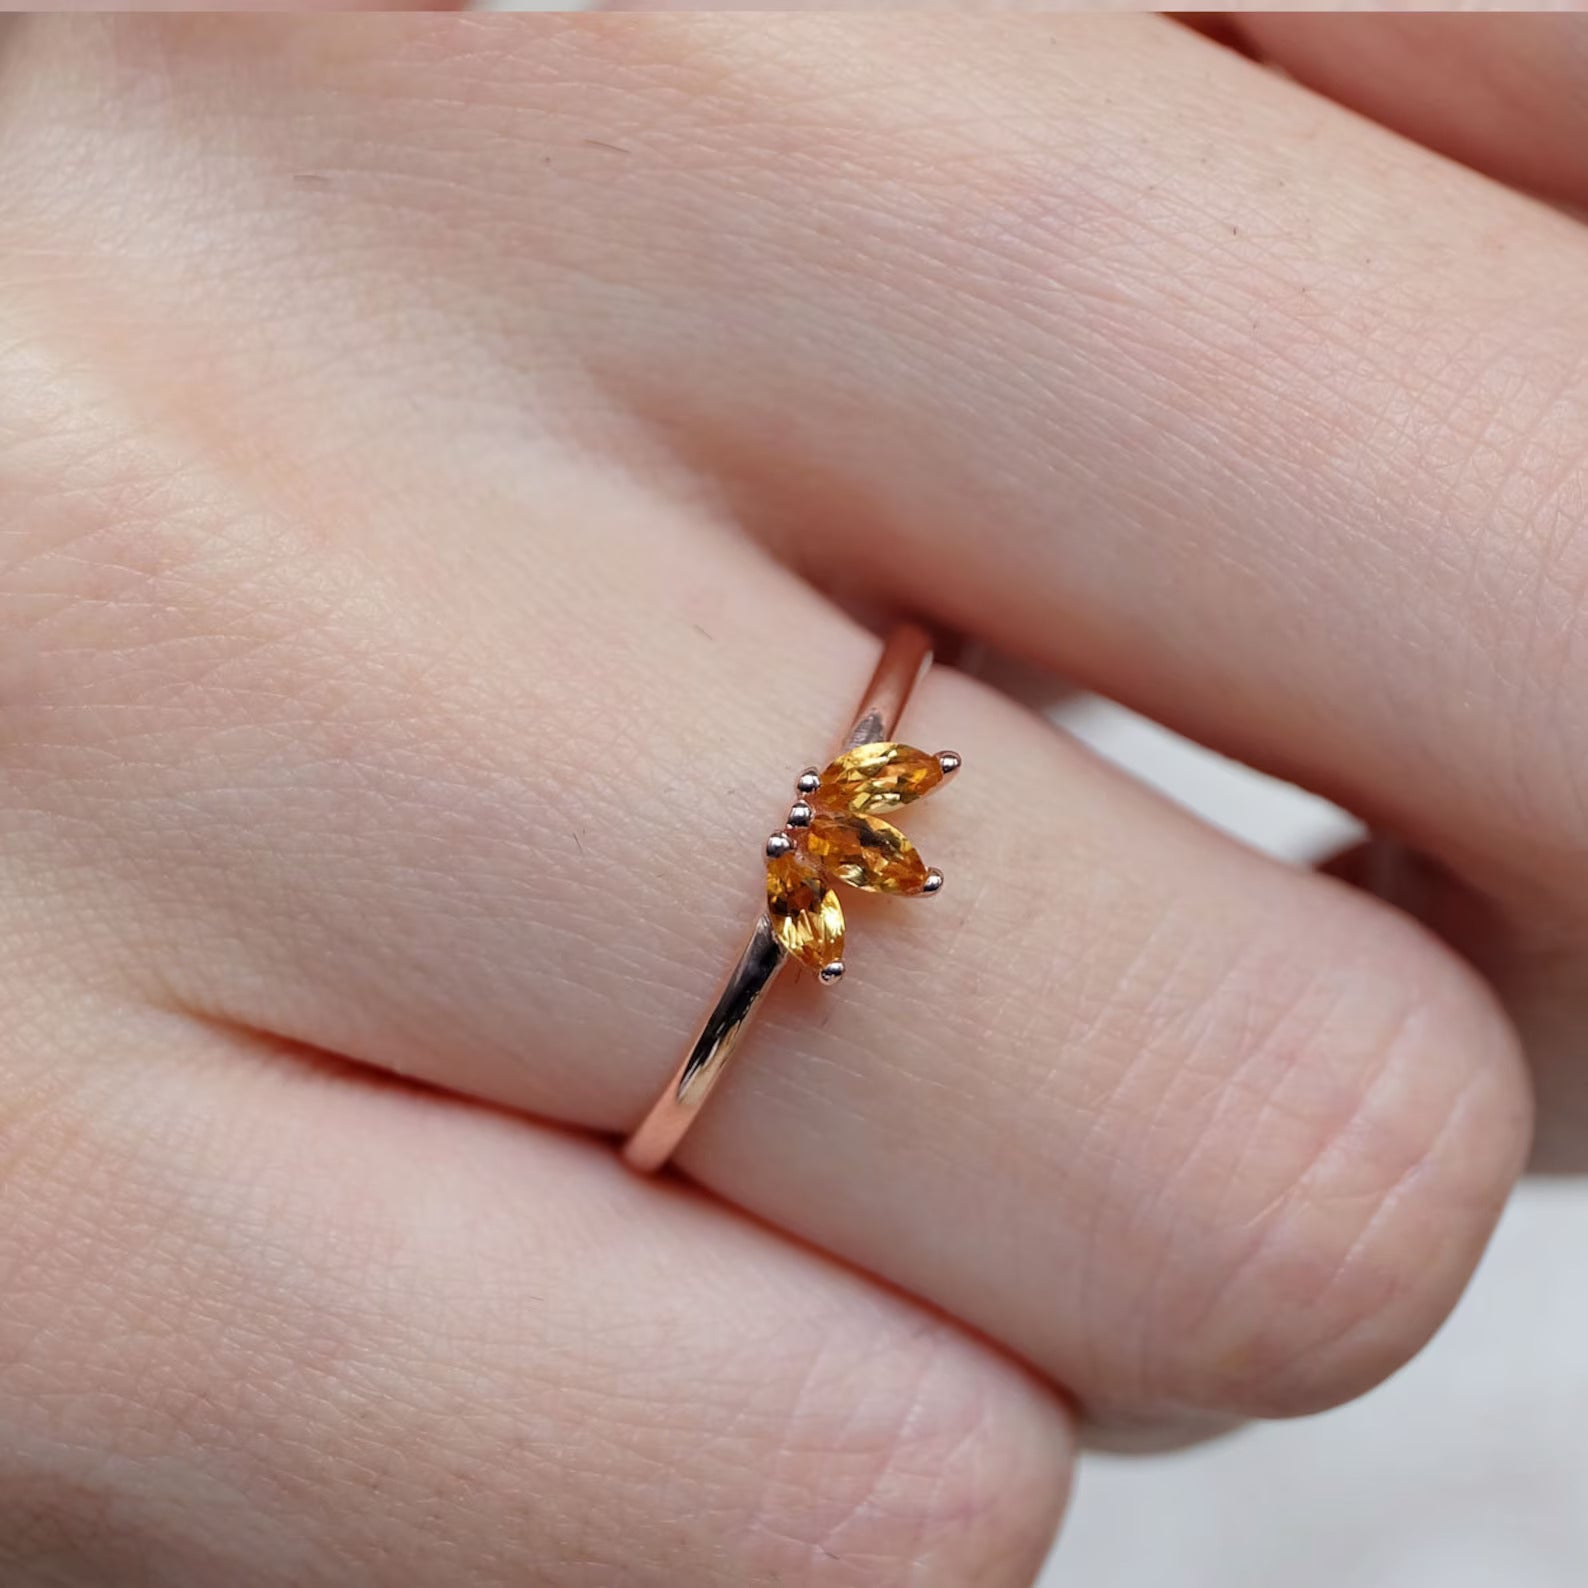 Citrine Marquise Ring Sholto - SOVATS